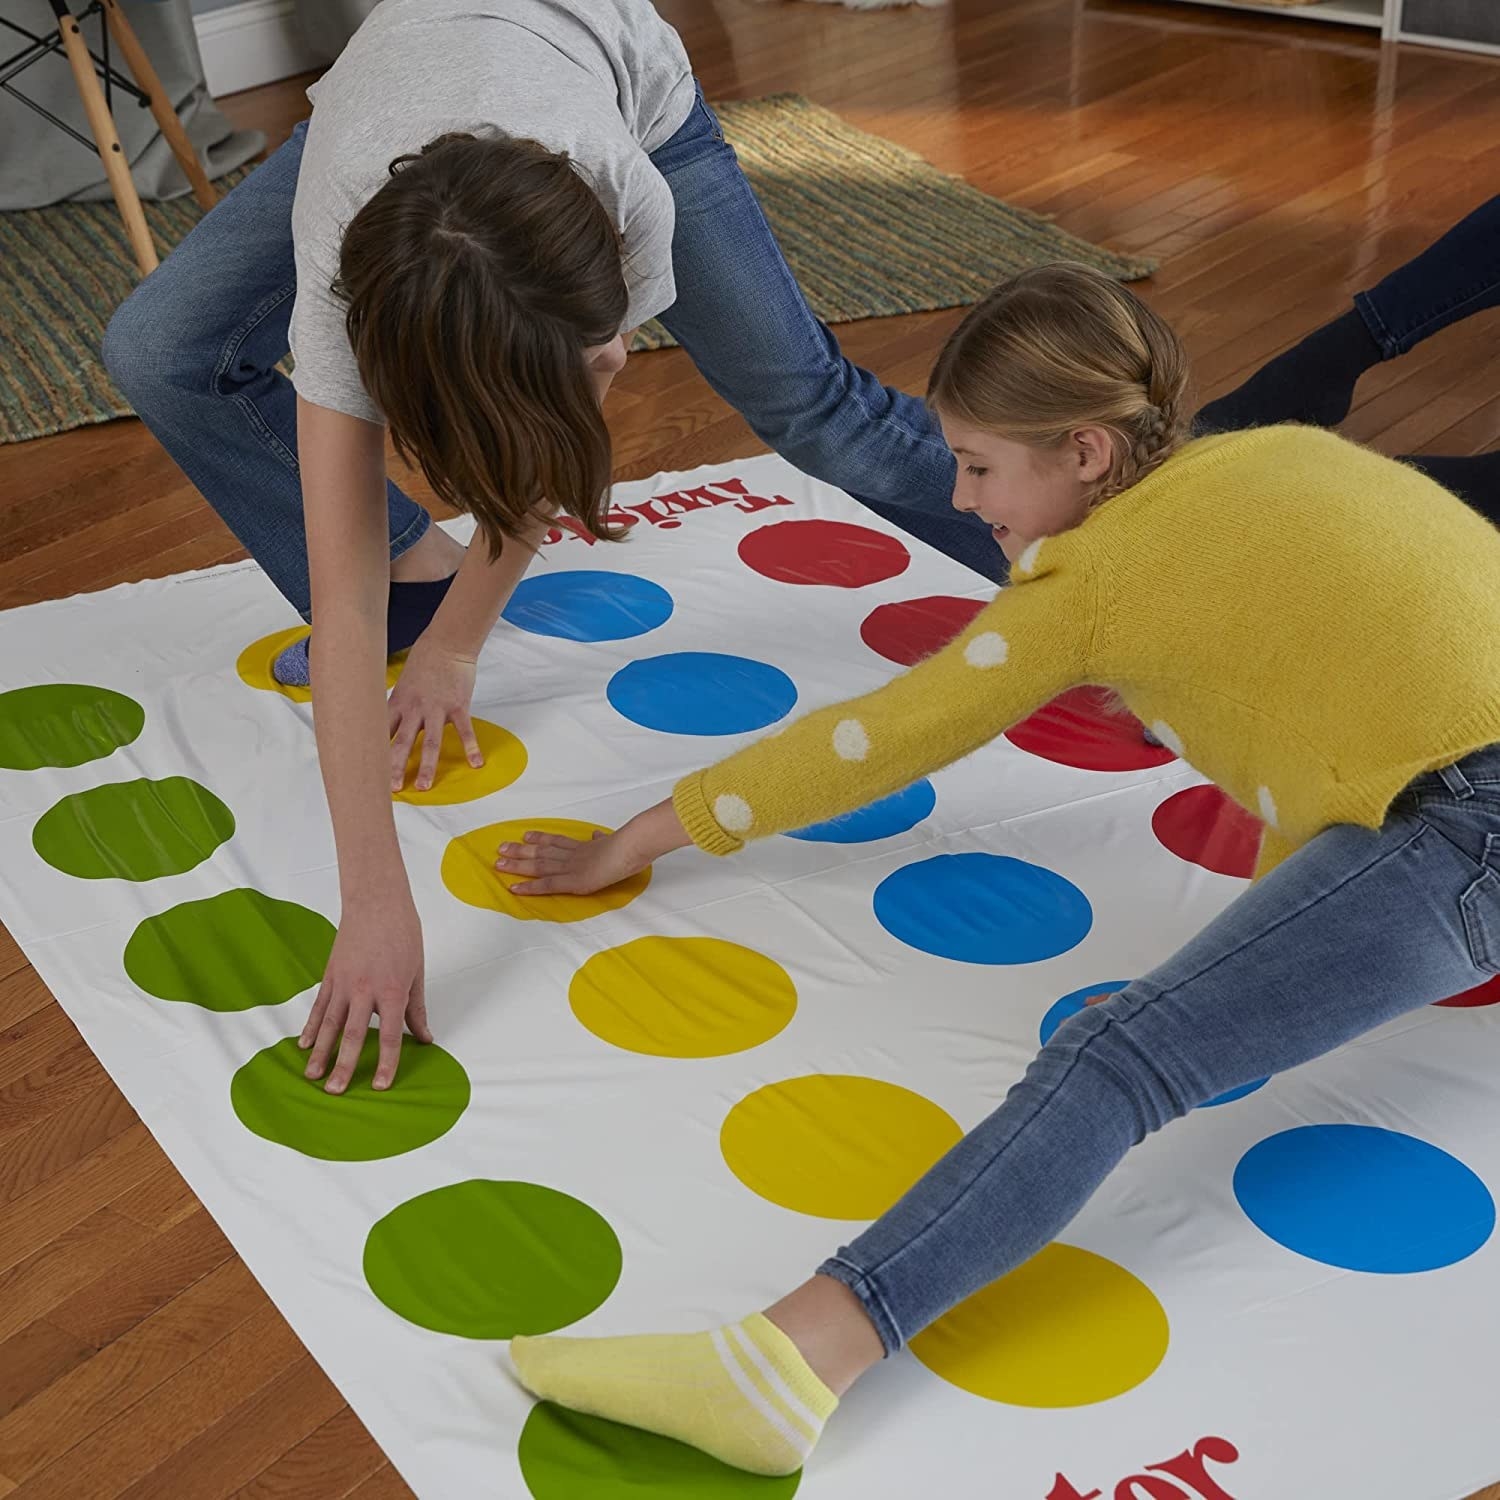 Two people play a game of Twister in a living room